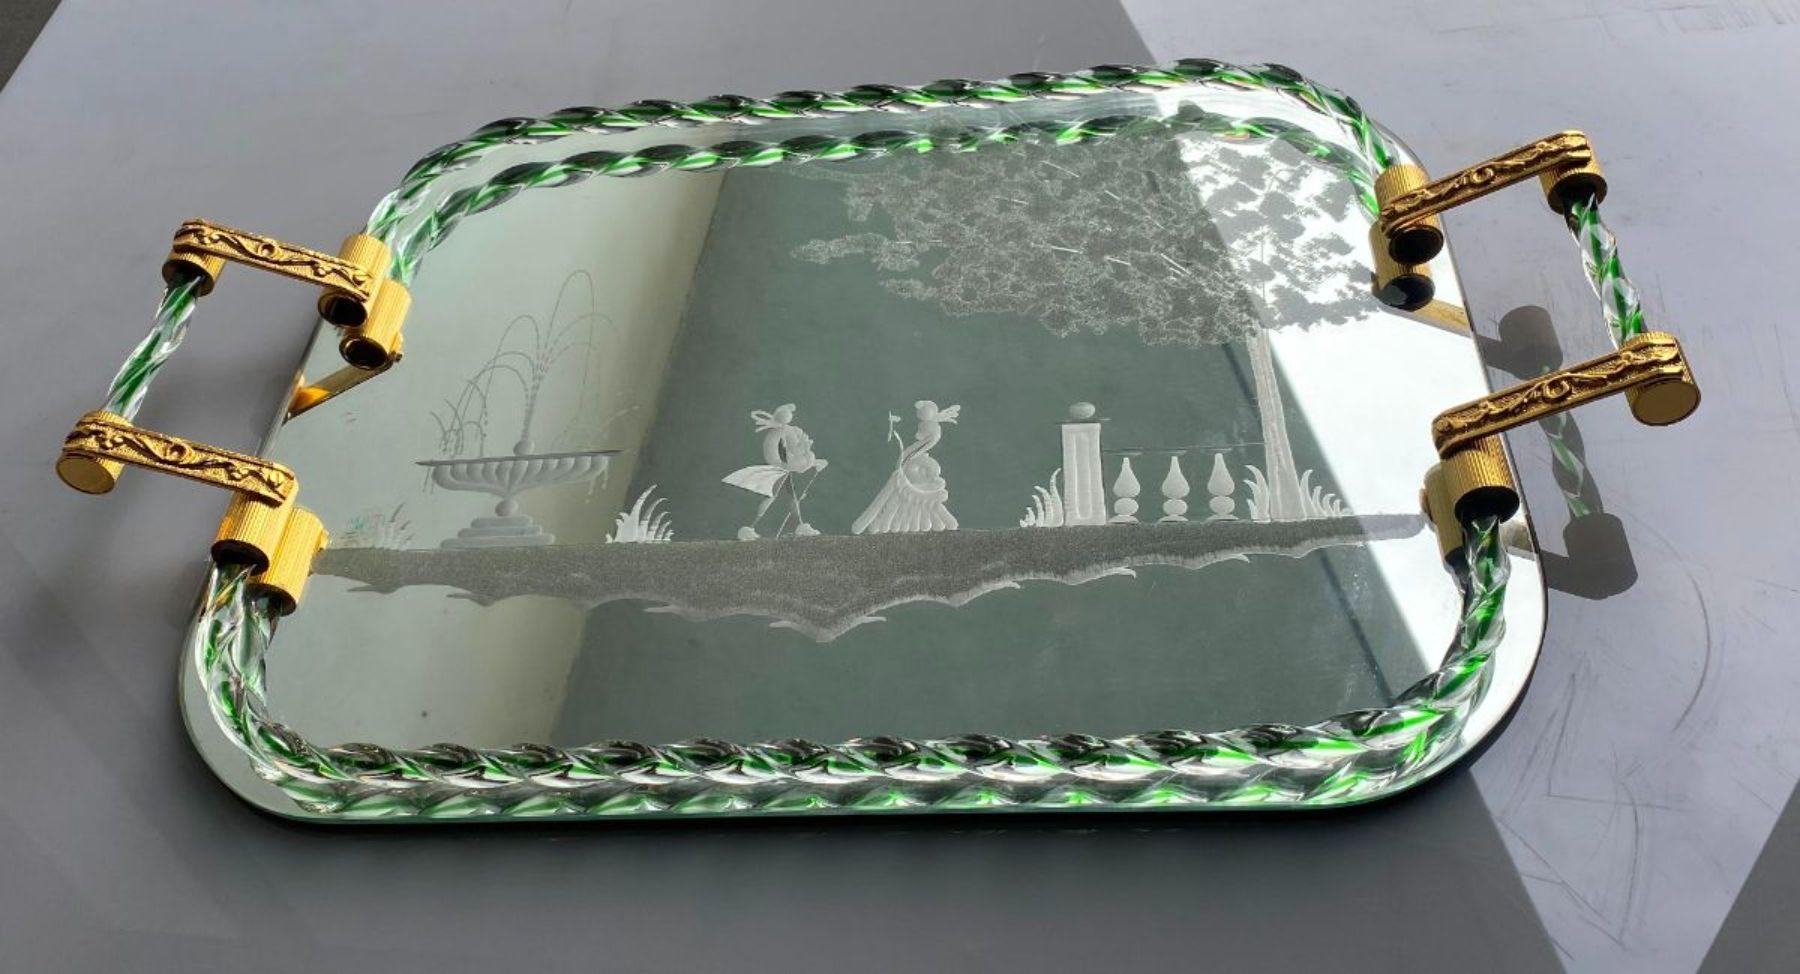 Mid-century mirror-engraved Murano glass serving tray. This wonderful piece was produced in Italy during 1940s. The mirror has romantic Venetian characters and a picturesque countryside landscape. Iconic vanity tray with handles; the rectangular top